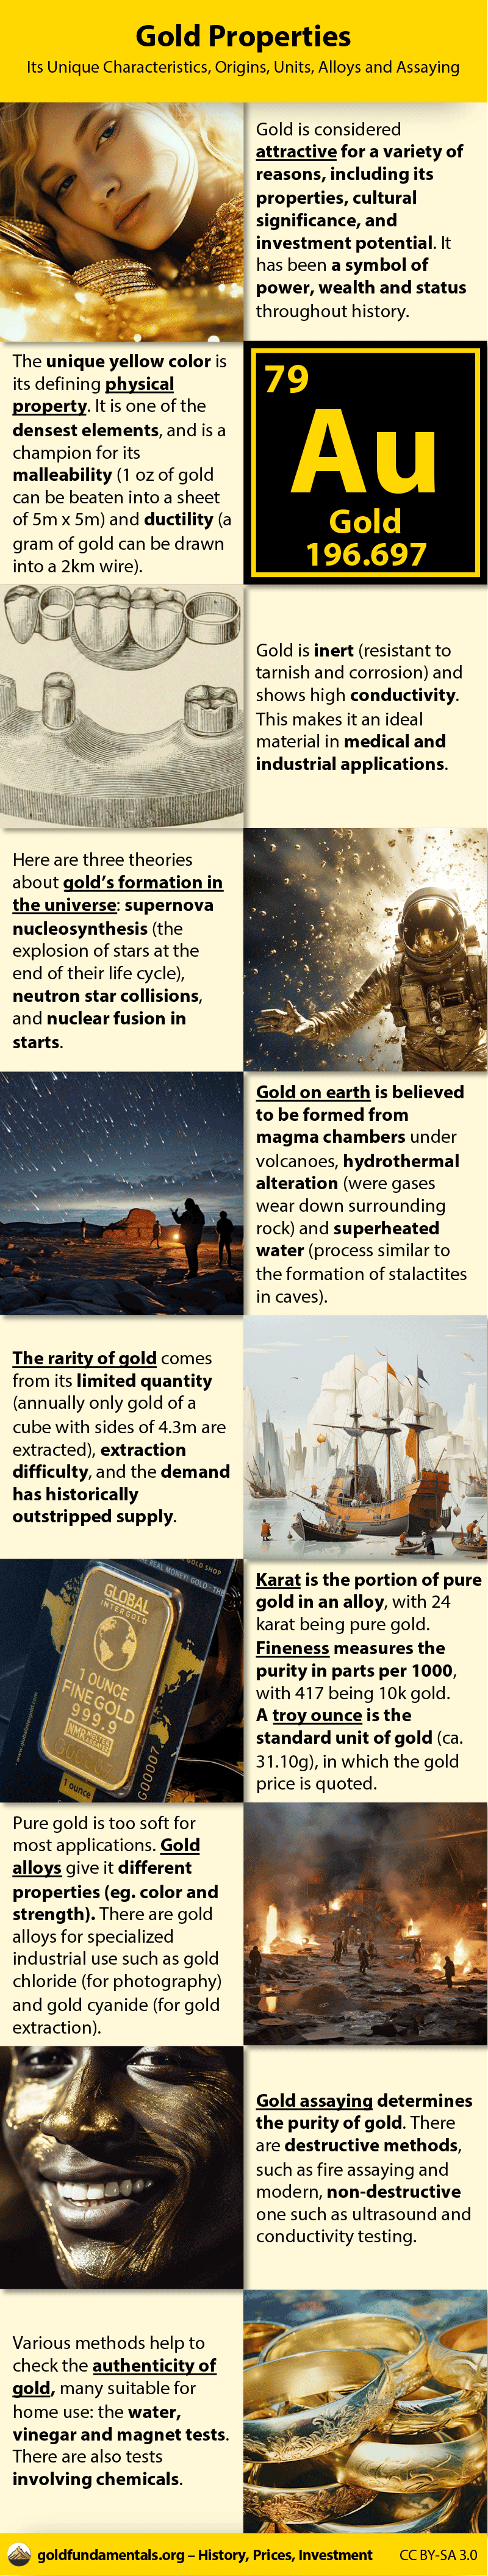 Infographic about Gold properites to its origins, alloys and assaying.